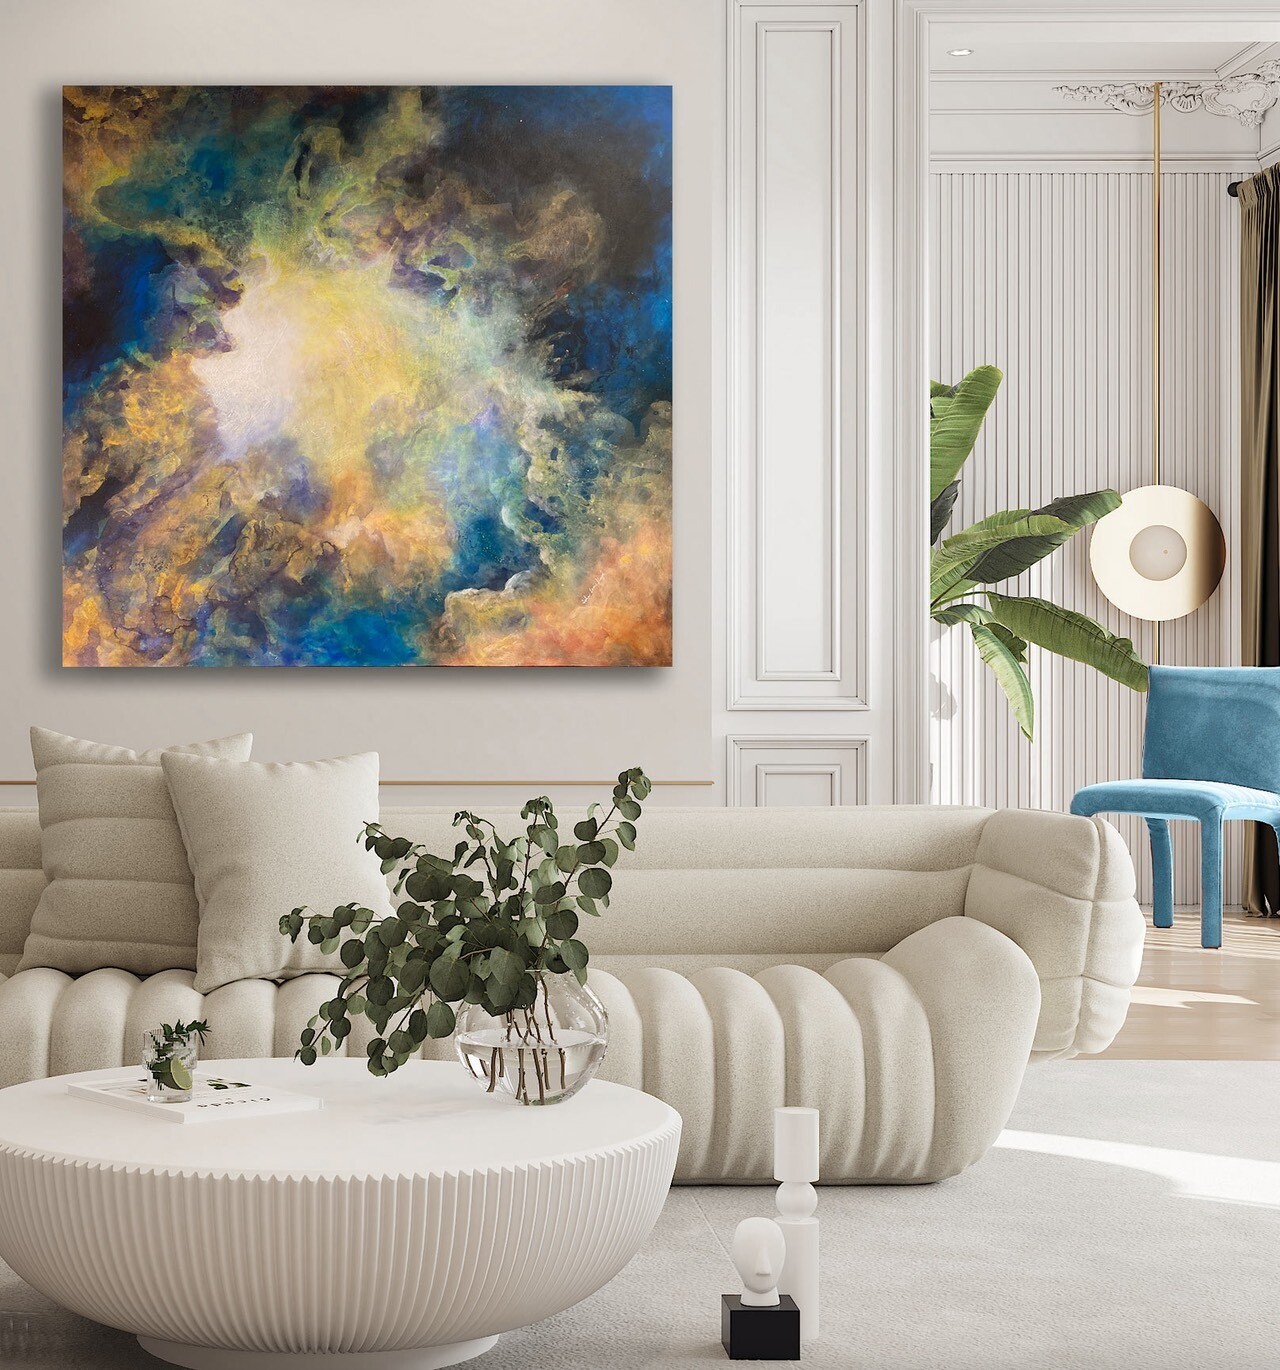 Square Abstract Paintings 'Glow Beyond vi'- 100x100cm, mixed media on canvas